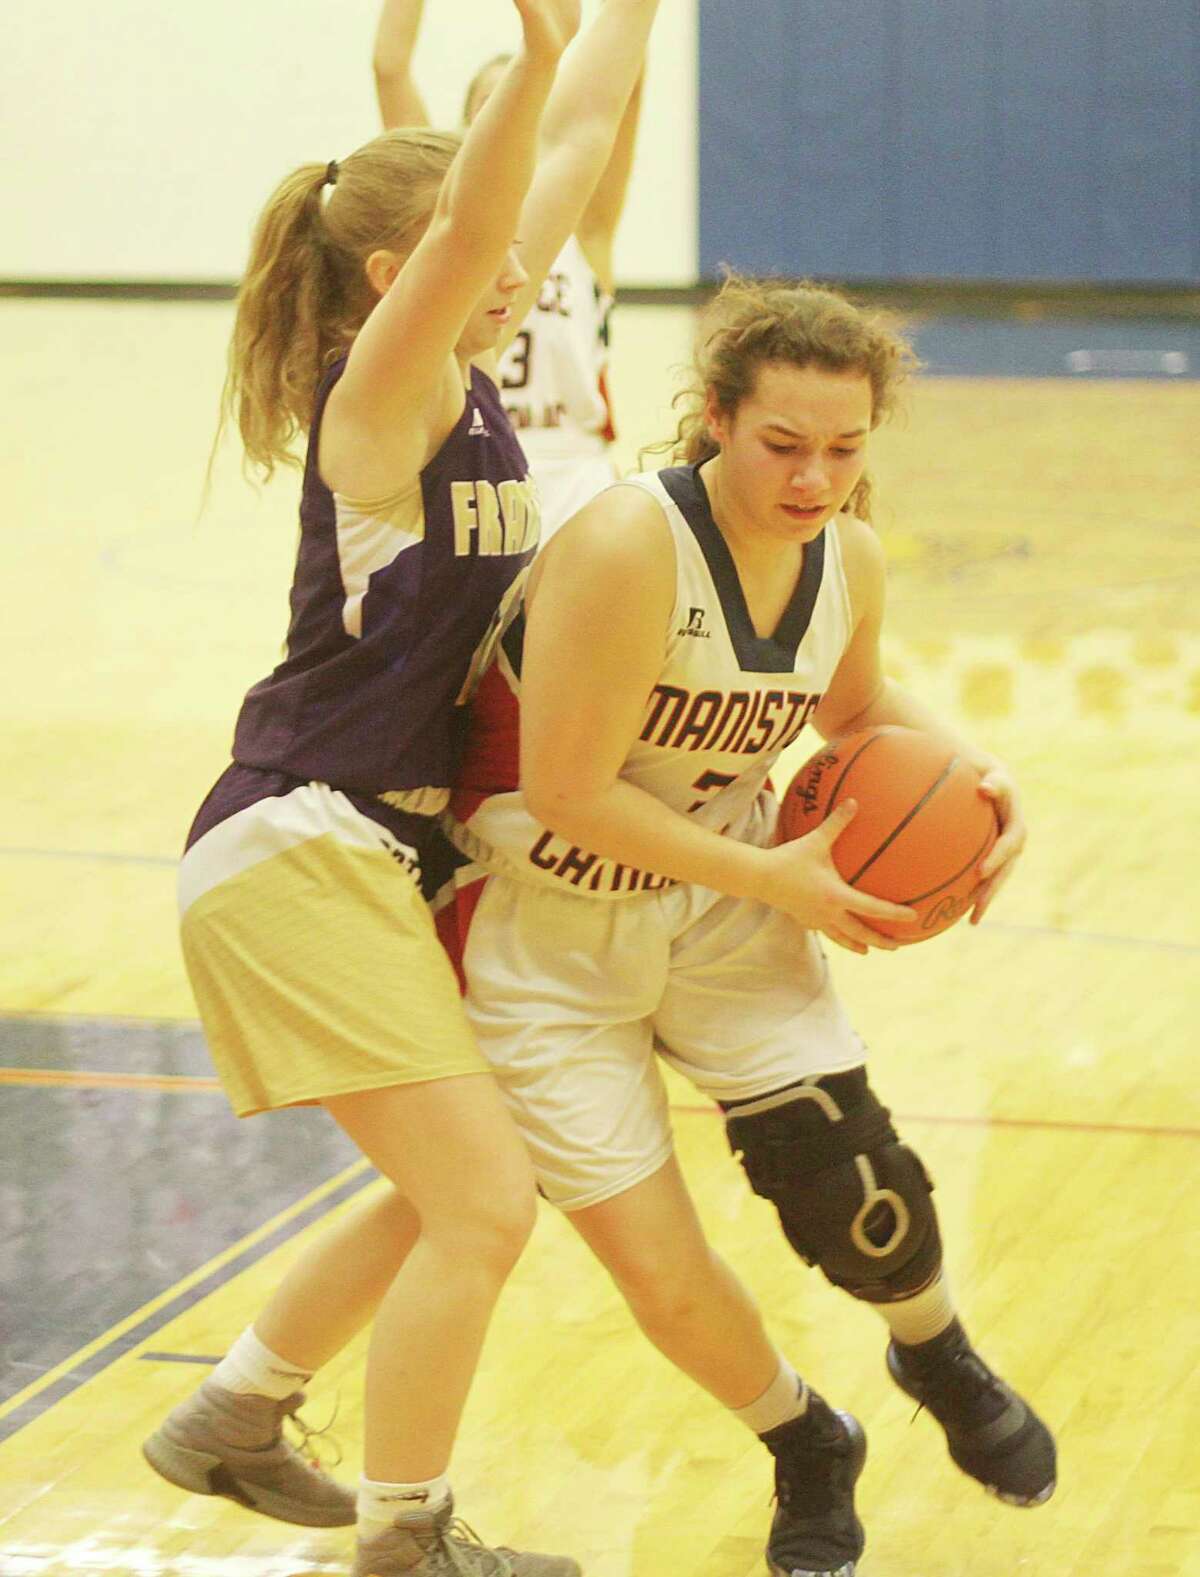 Manistee Catholic Central's Leah Stickney is guarded by a Frankfort defender during the Sabers' district loss in Onekama on Monday. (Kyle Kotecki/News Advocate)